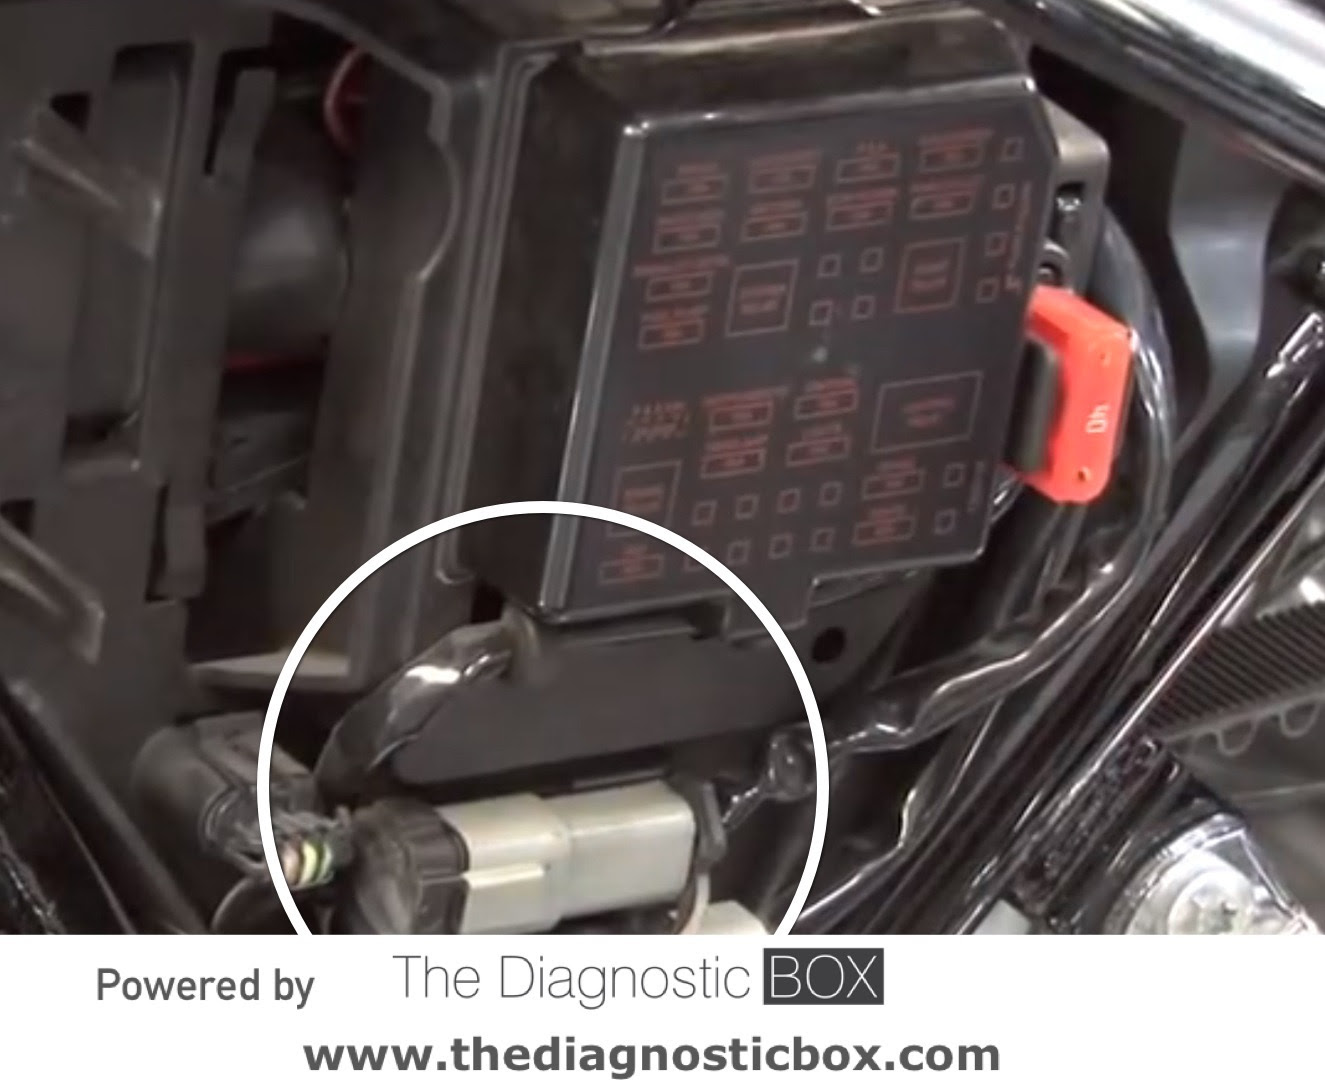 2011 Harley Davidson Road King Fuse Box Location | schematic and wiring